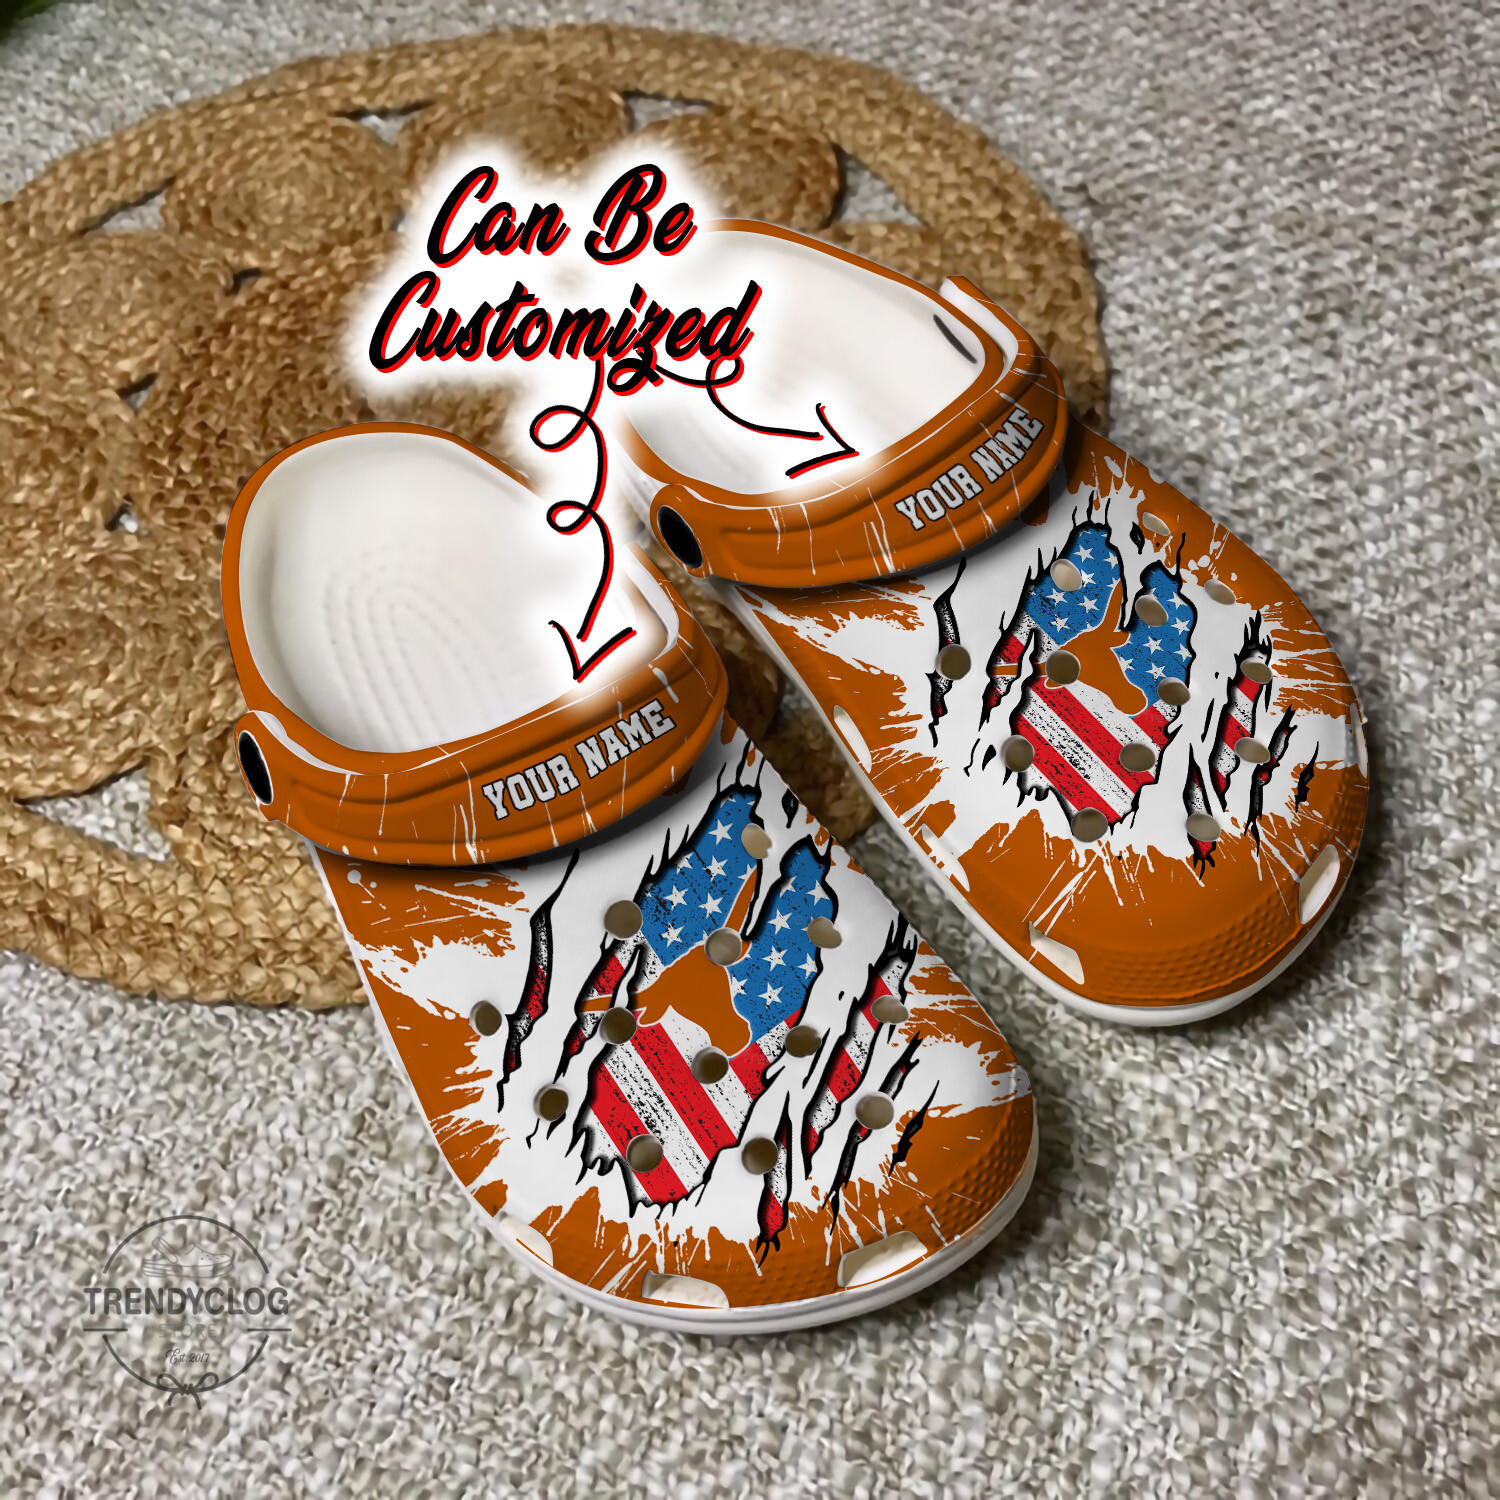 Sport Crocs Personalized TLonghorns University Ripped American Flag Clog Shoes